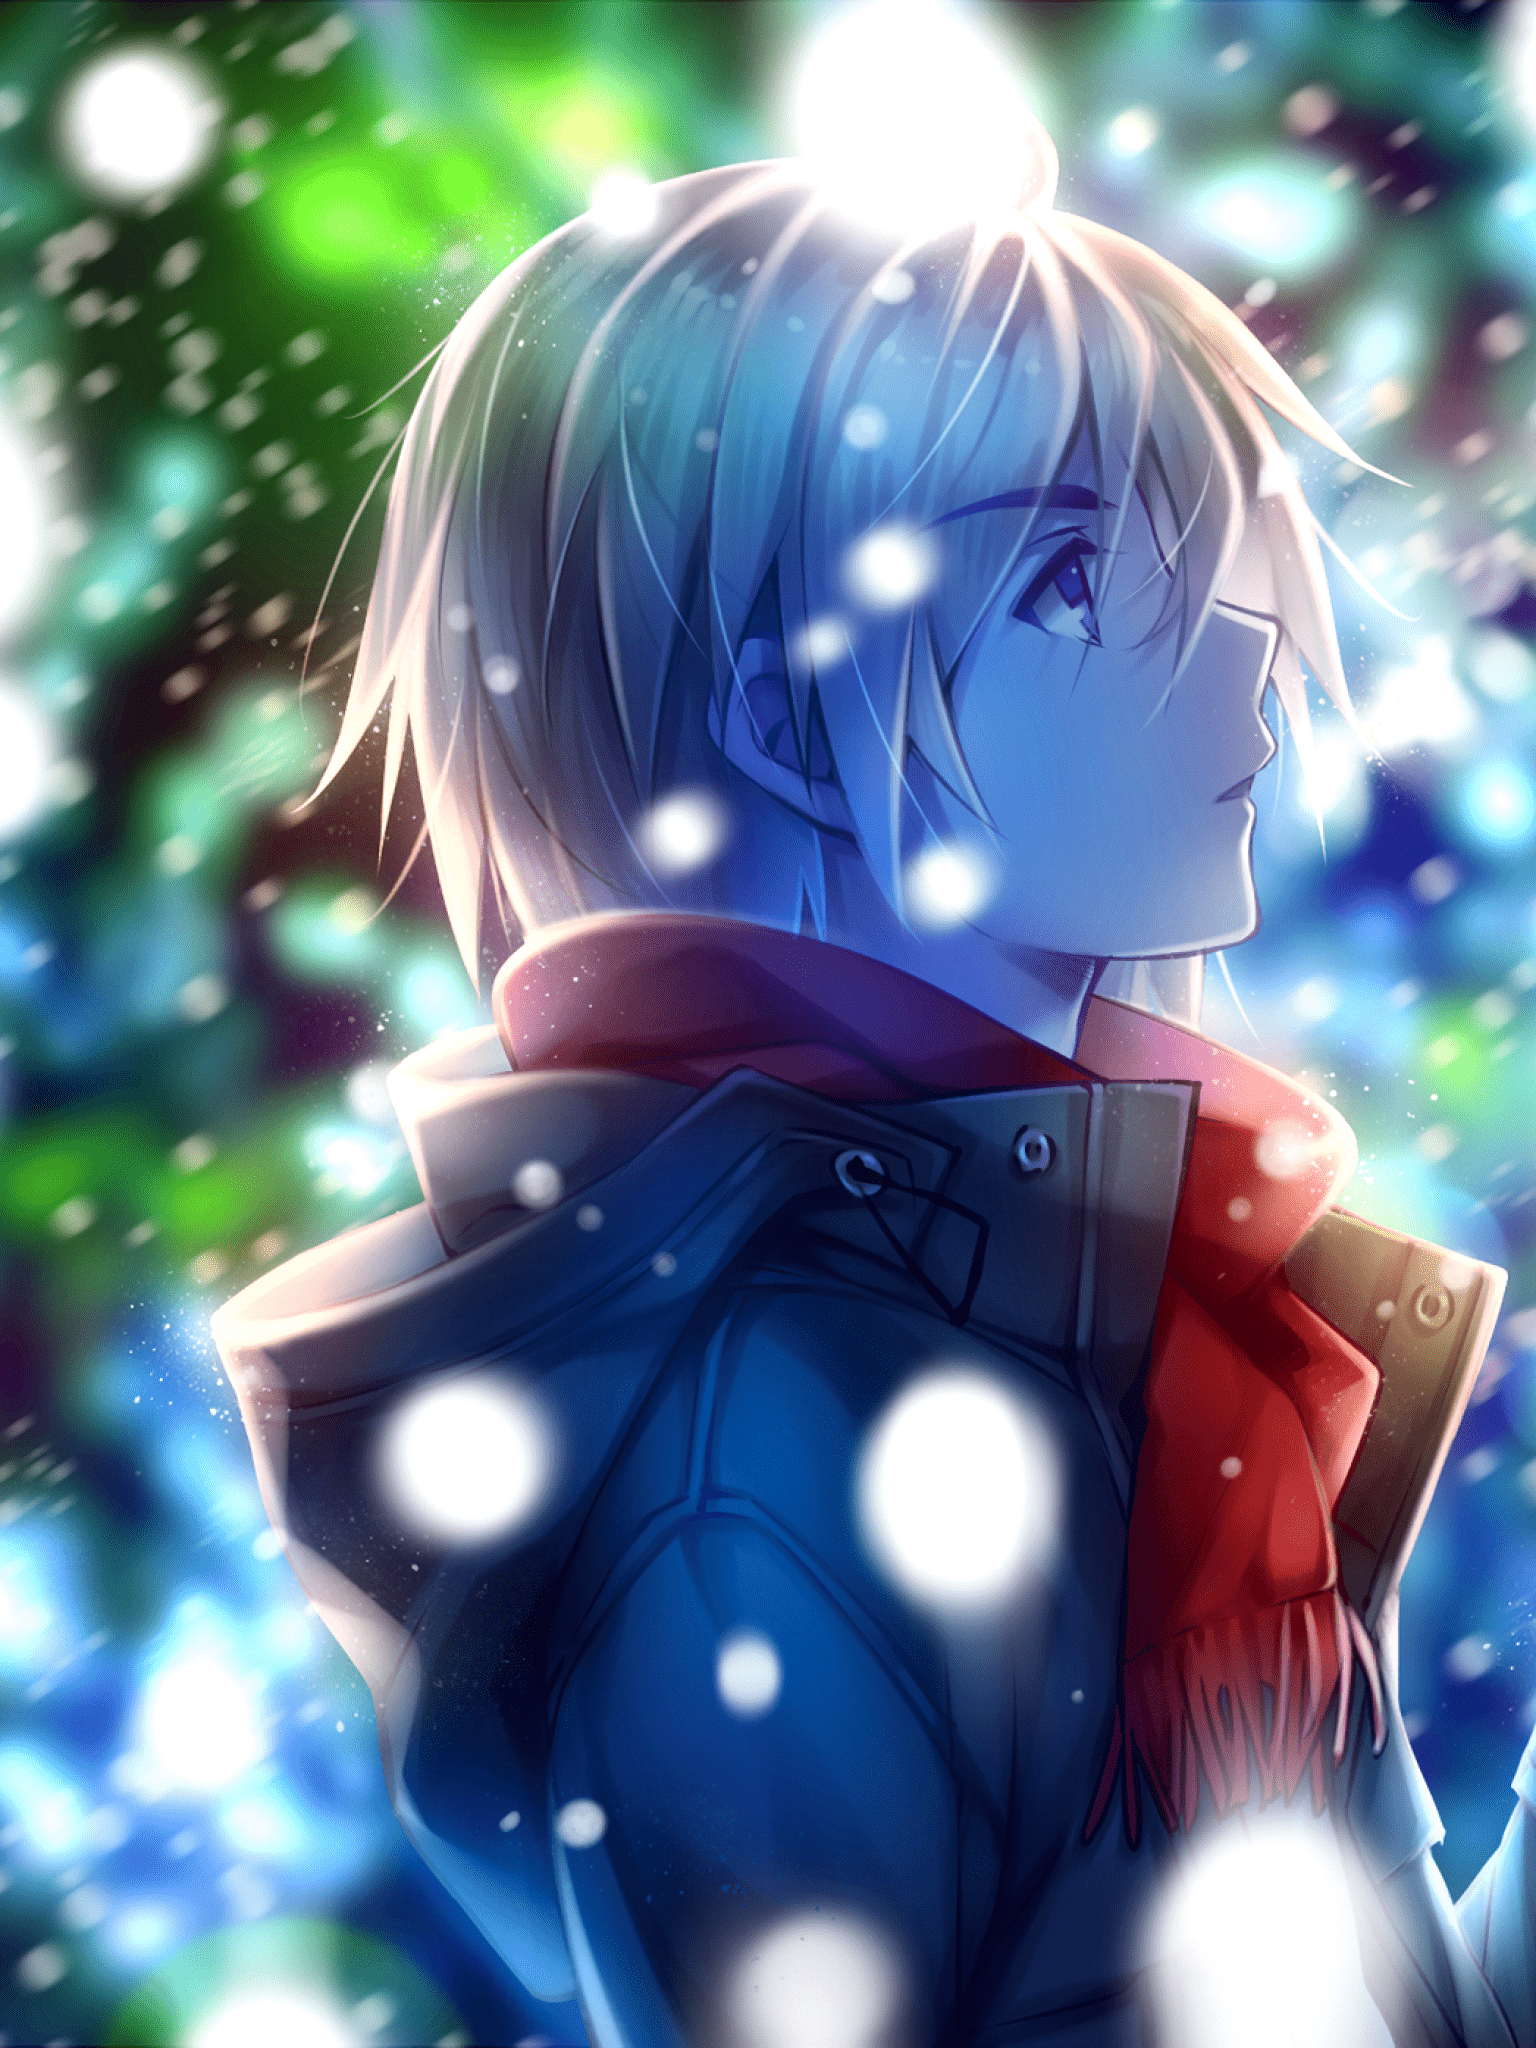 Anime Snow Wallpapers Top Free Anime Snow Backgrounds Wallpaperaccess 4183